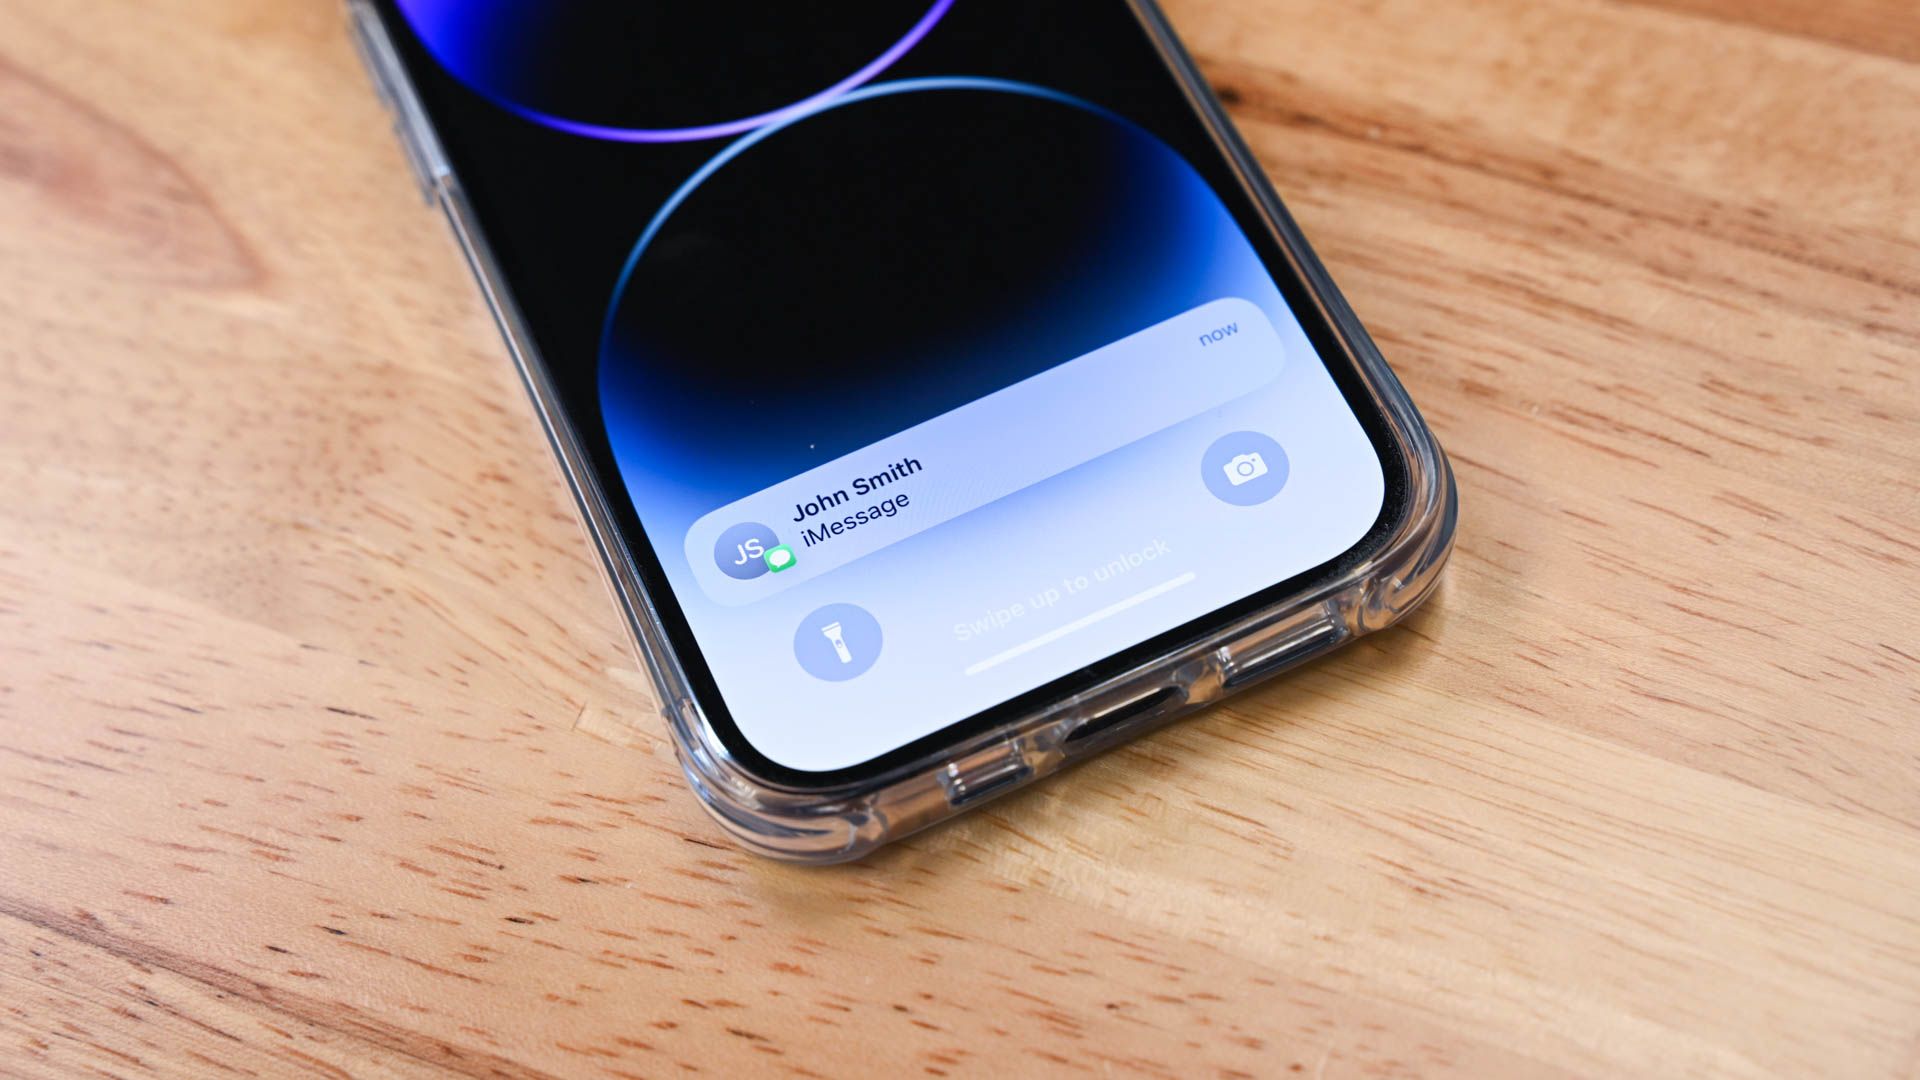 iMessage Notification on an iPhone.